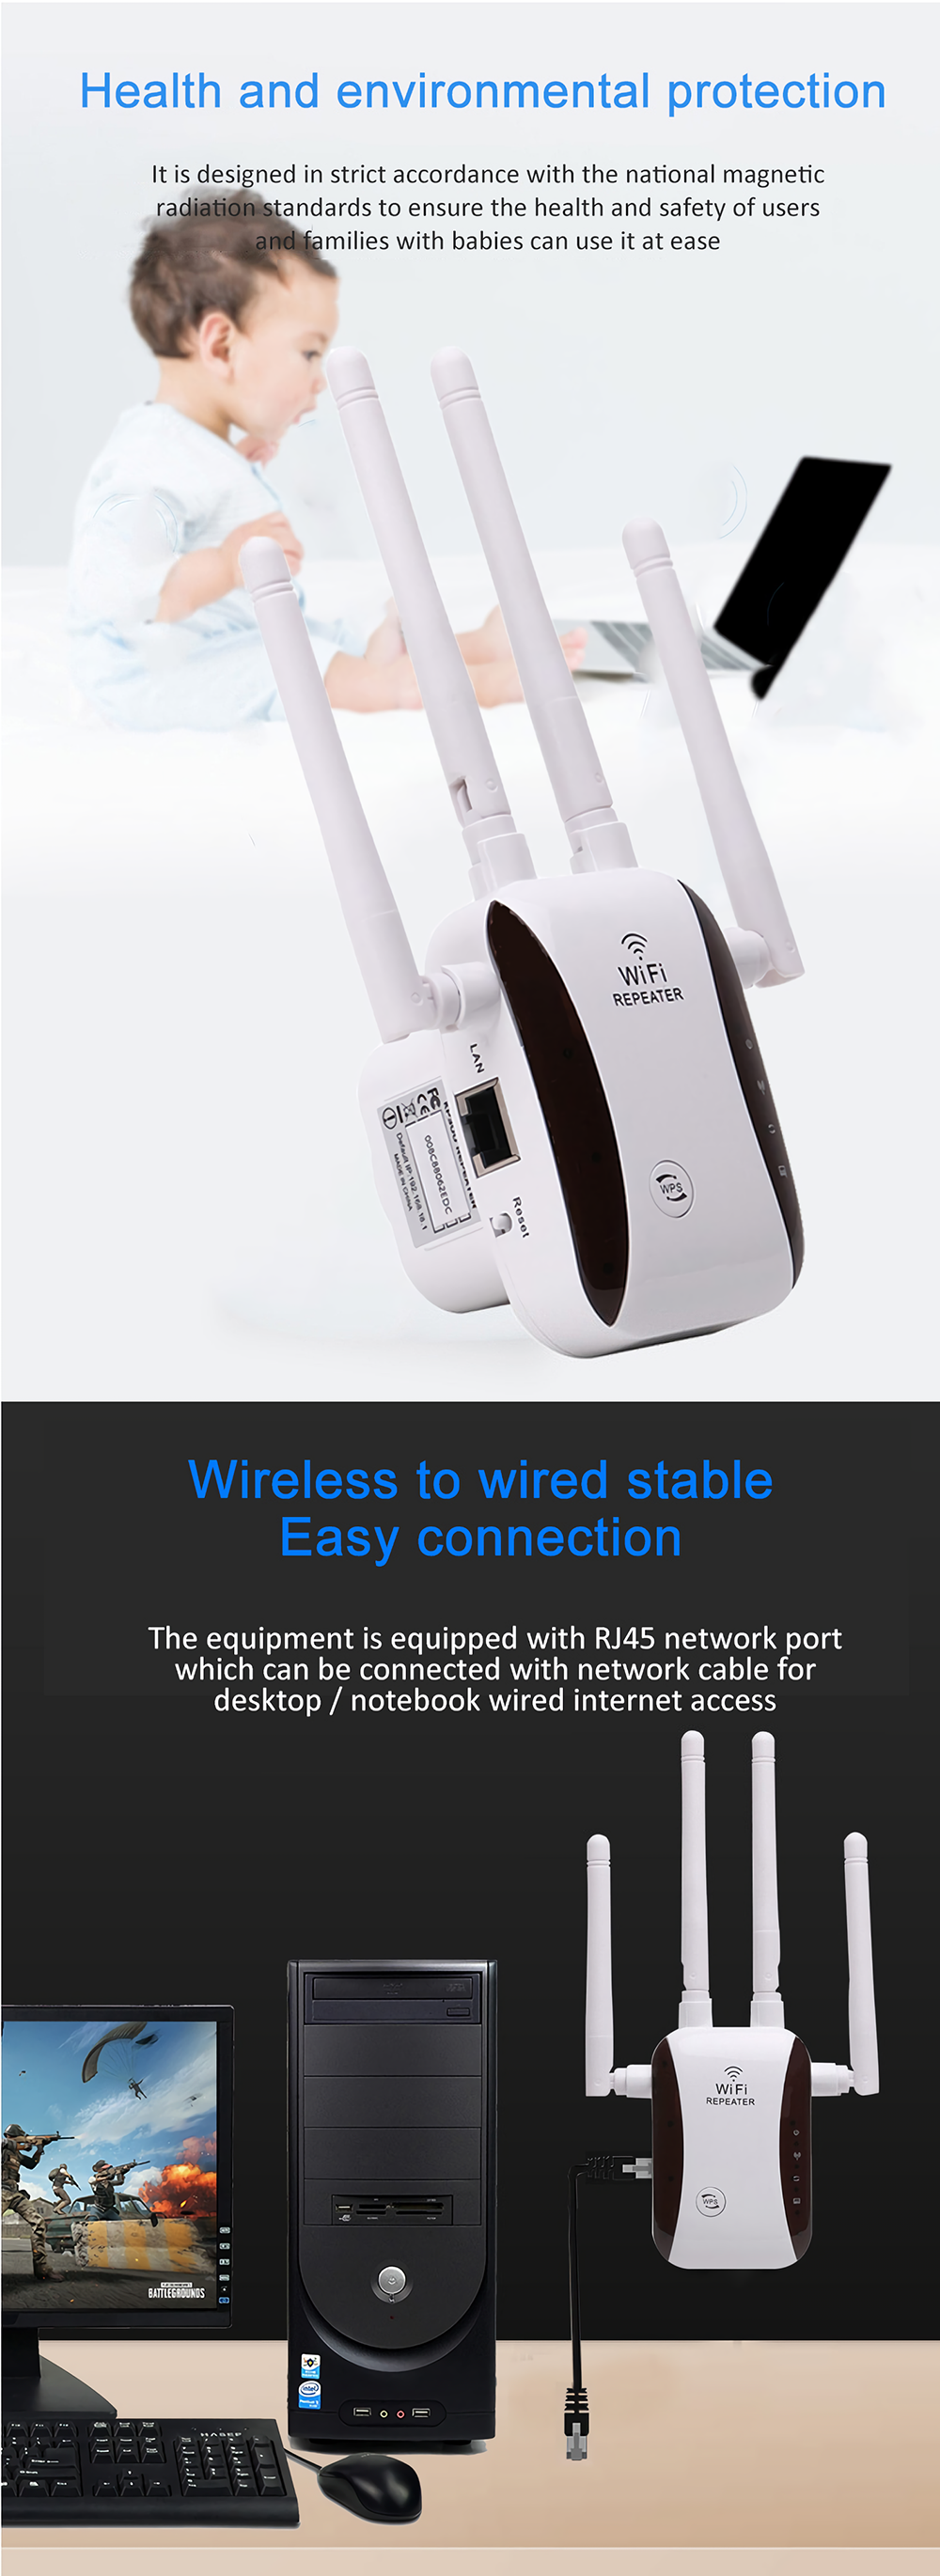 NBKEY-300Mbps-WiFi-Range-Extender-Wireless-Repeater-24-GHz-Support-Wireless-APRouter-Mode-with-Ether-1885234-3